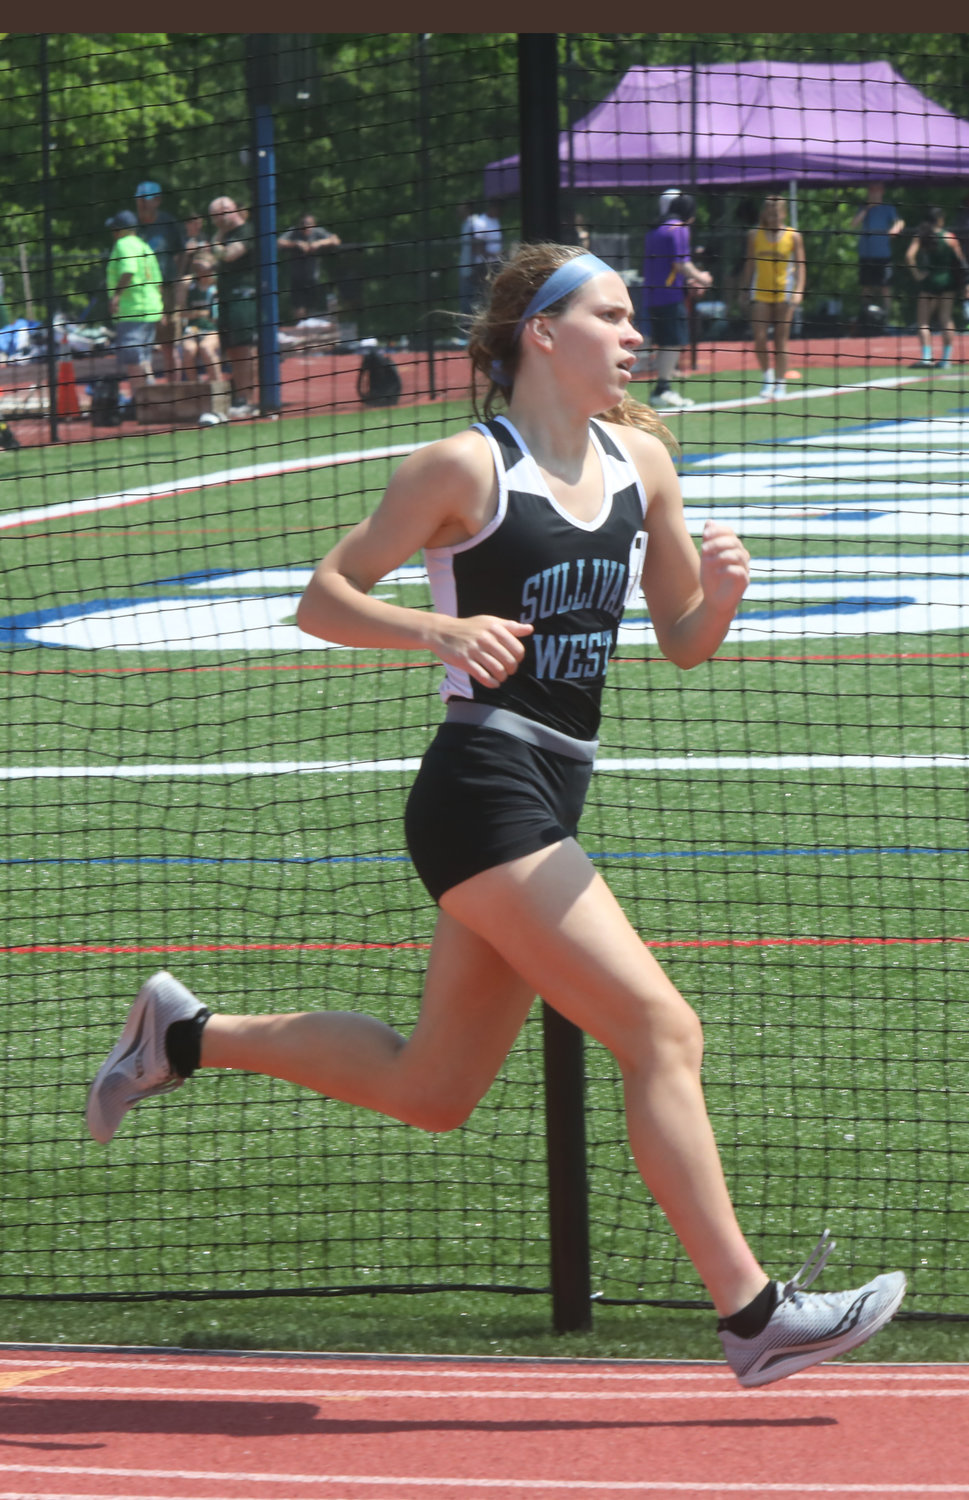 Sullivan West’s Grace Boyd added to her school track legacy by breaking the school record in the 1500. She finished fourth overall. She narrowly missed doing so in the 3000 and had already broken the school steeplechase record early this season.